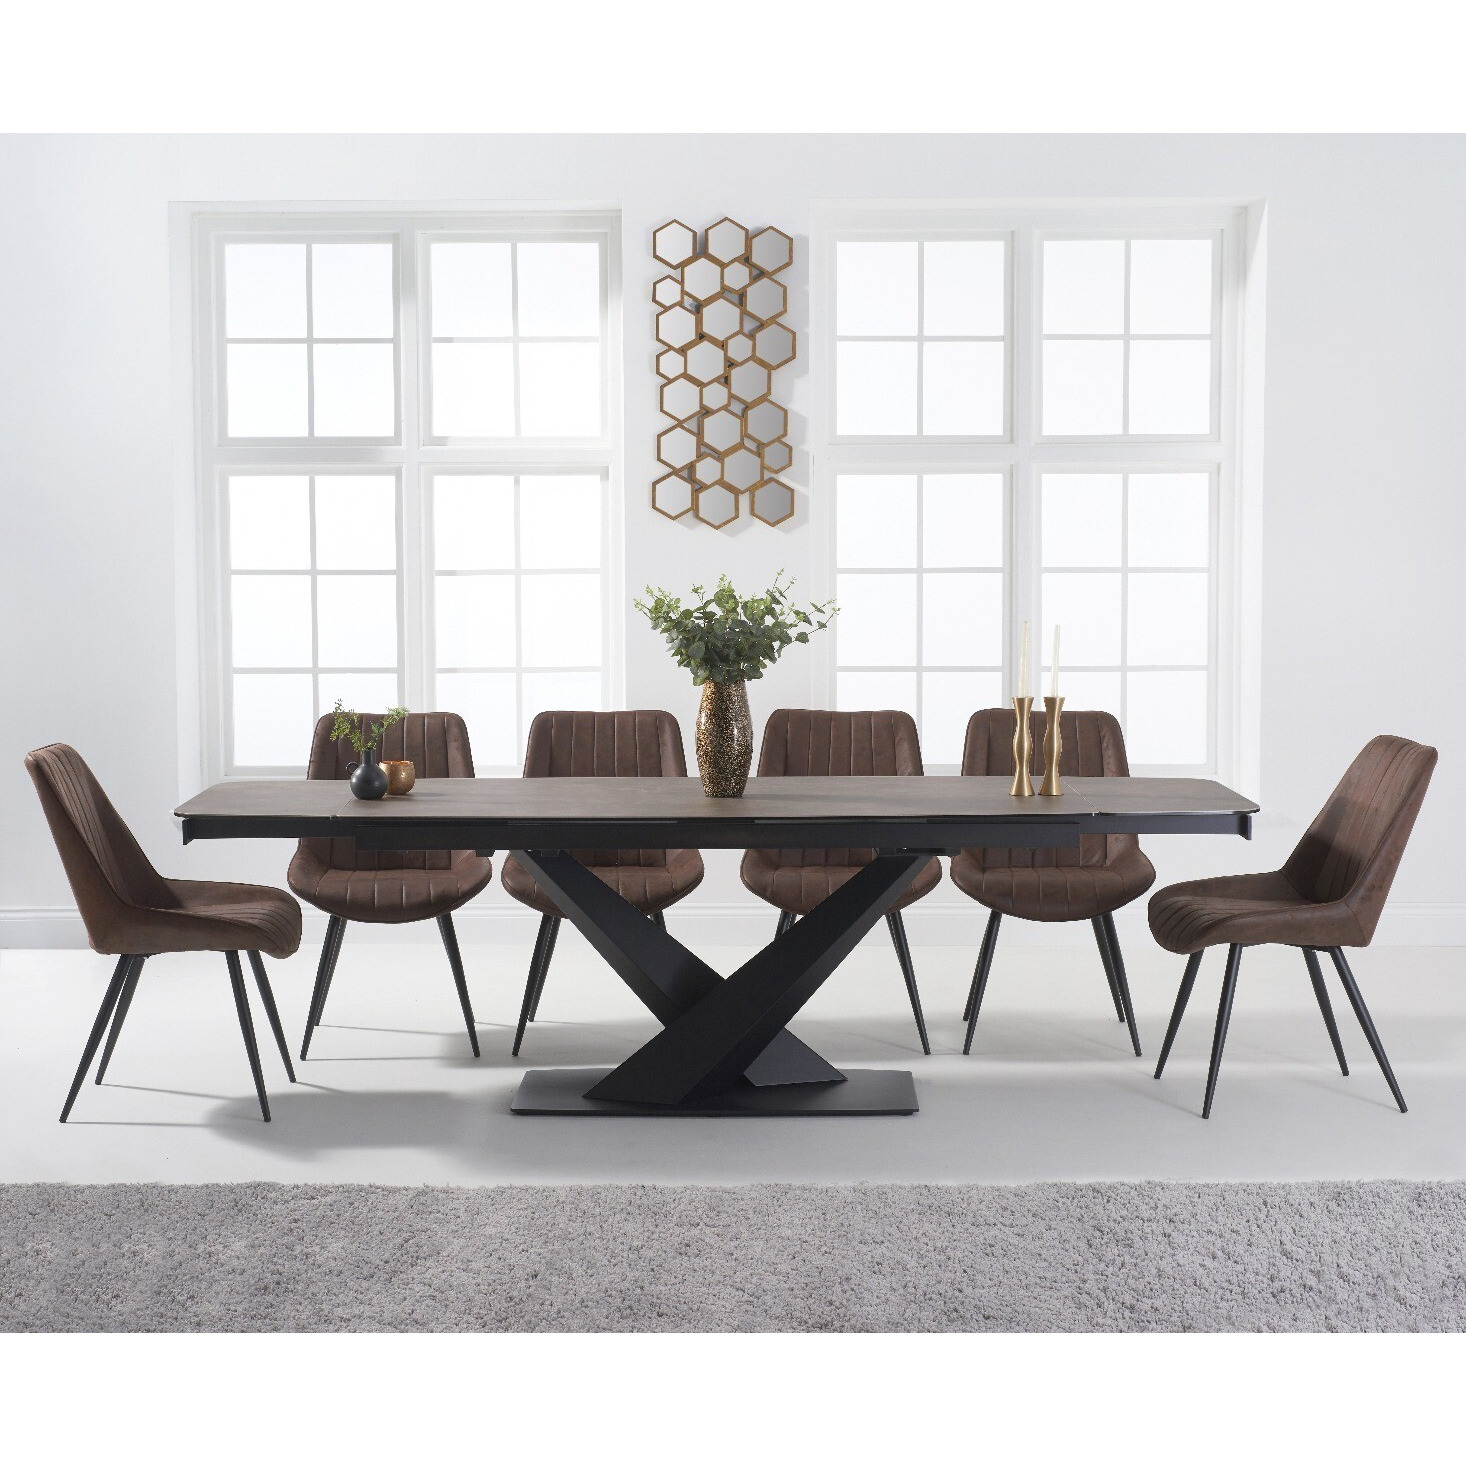 Extending  Jacob 180cm Mink Ceramic Dining Table with 6 Mink Brody Chairs